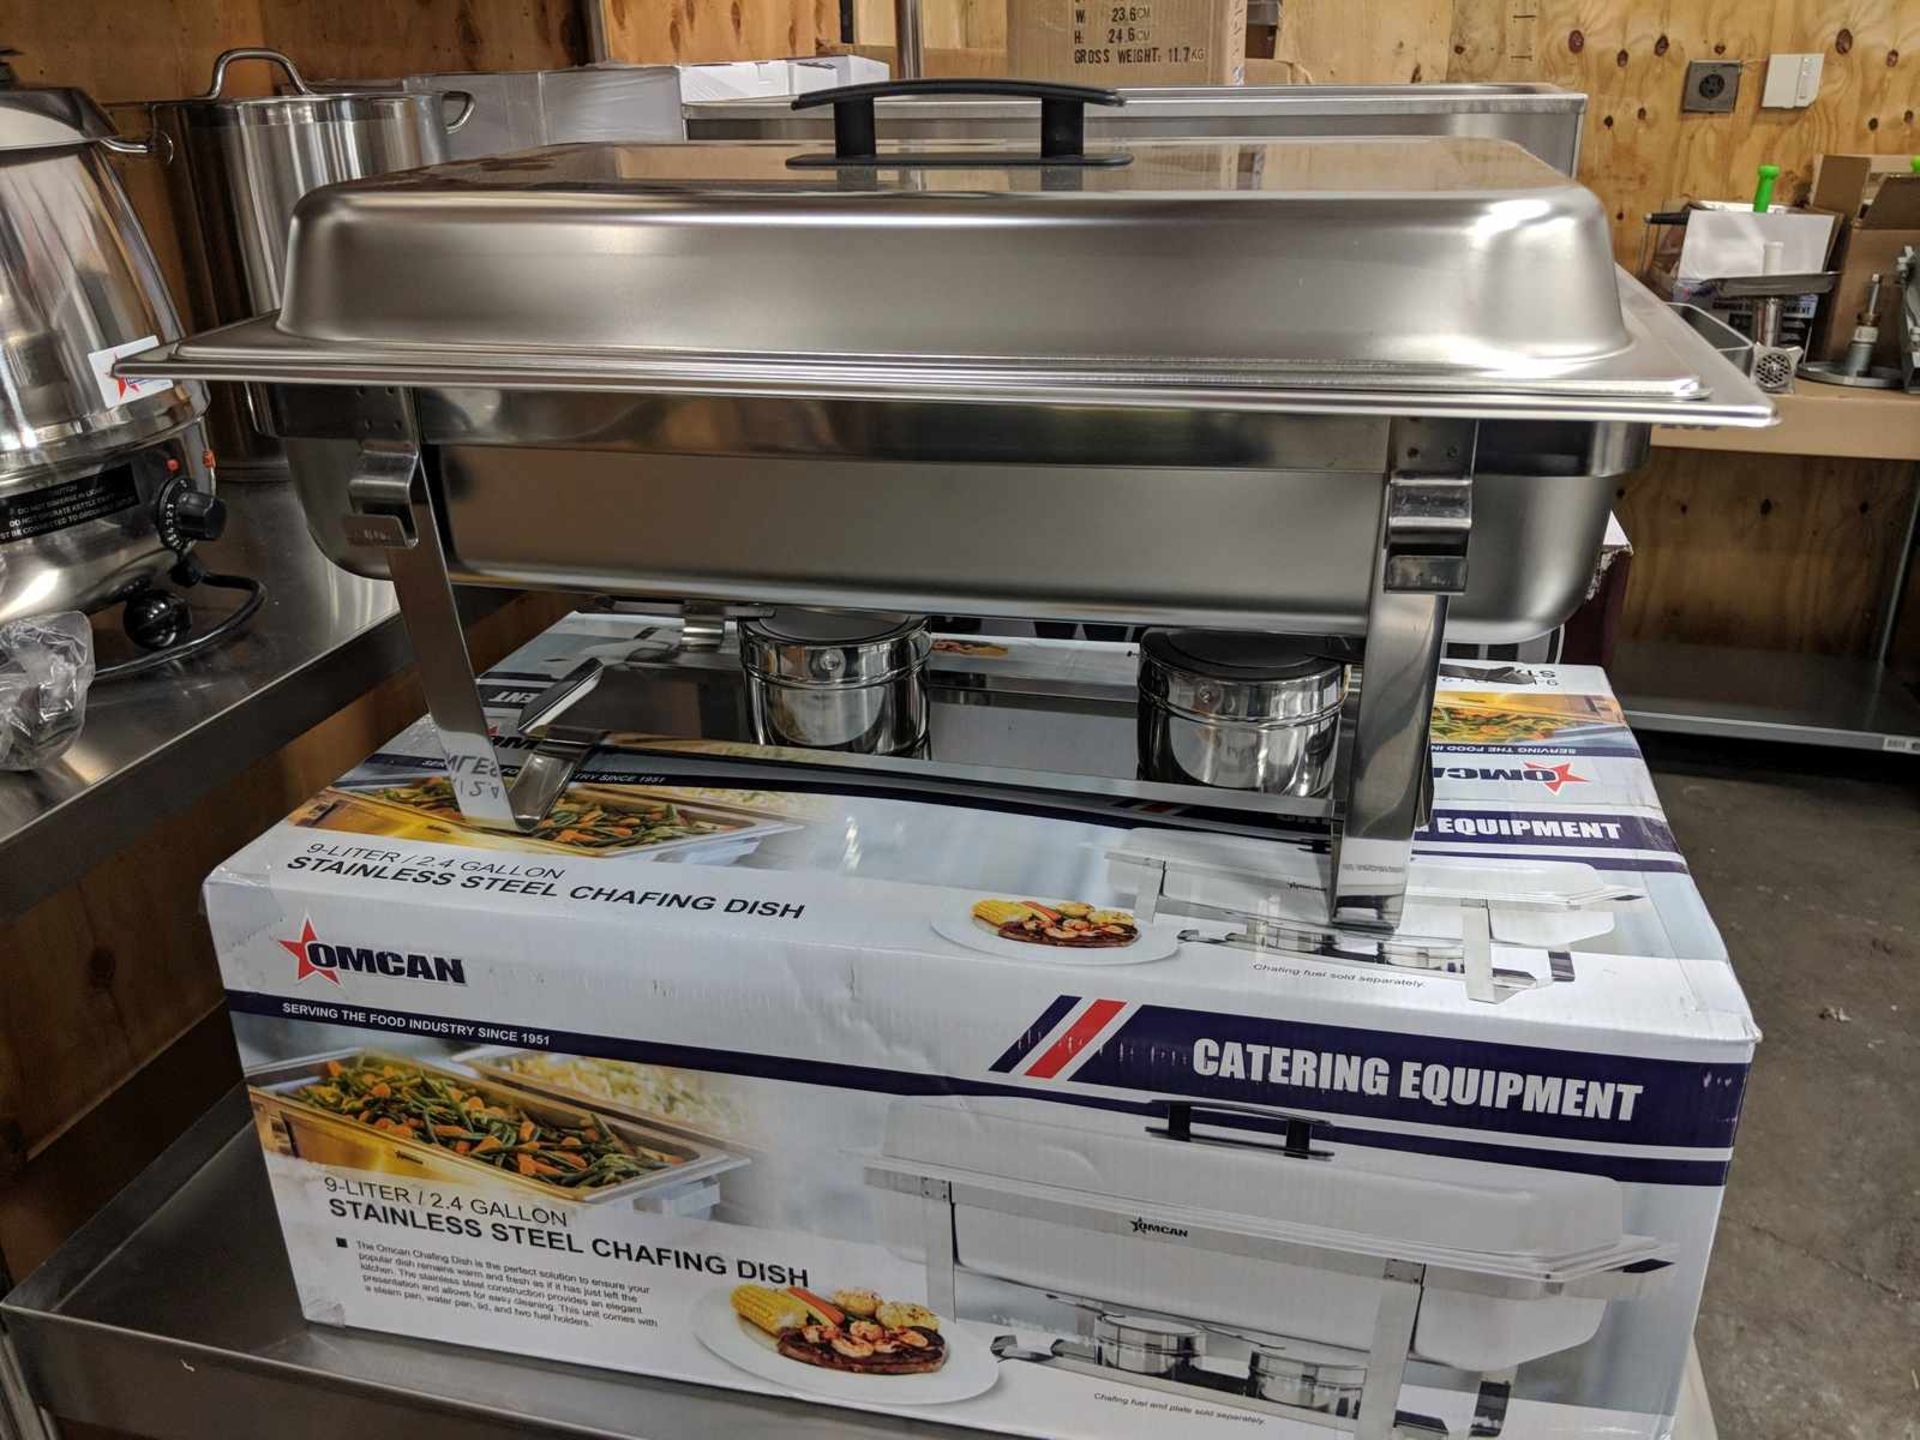 9L Stainless Chafing Dishes with Fixed Legs - Lot of 2